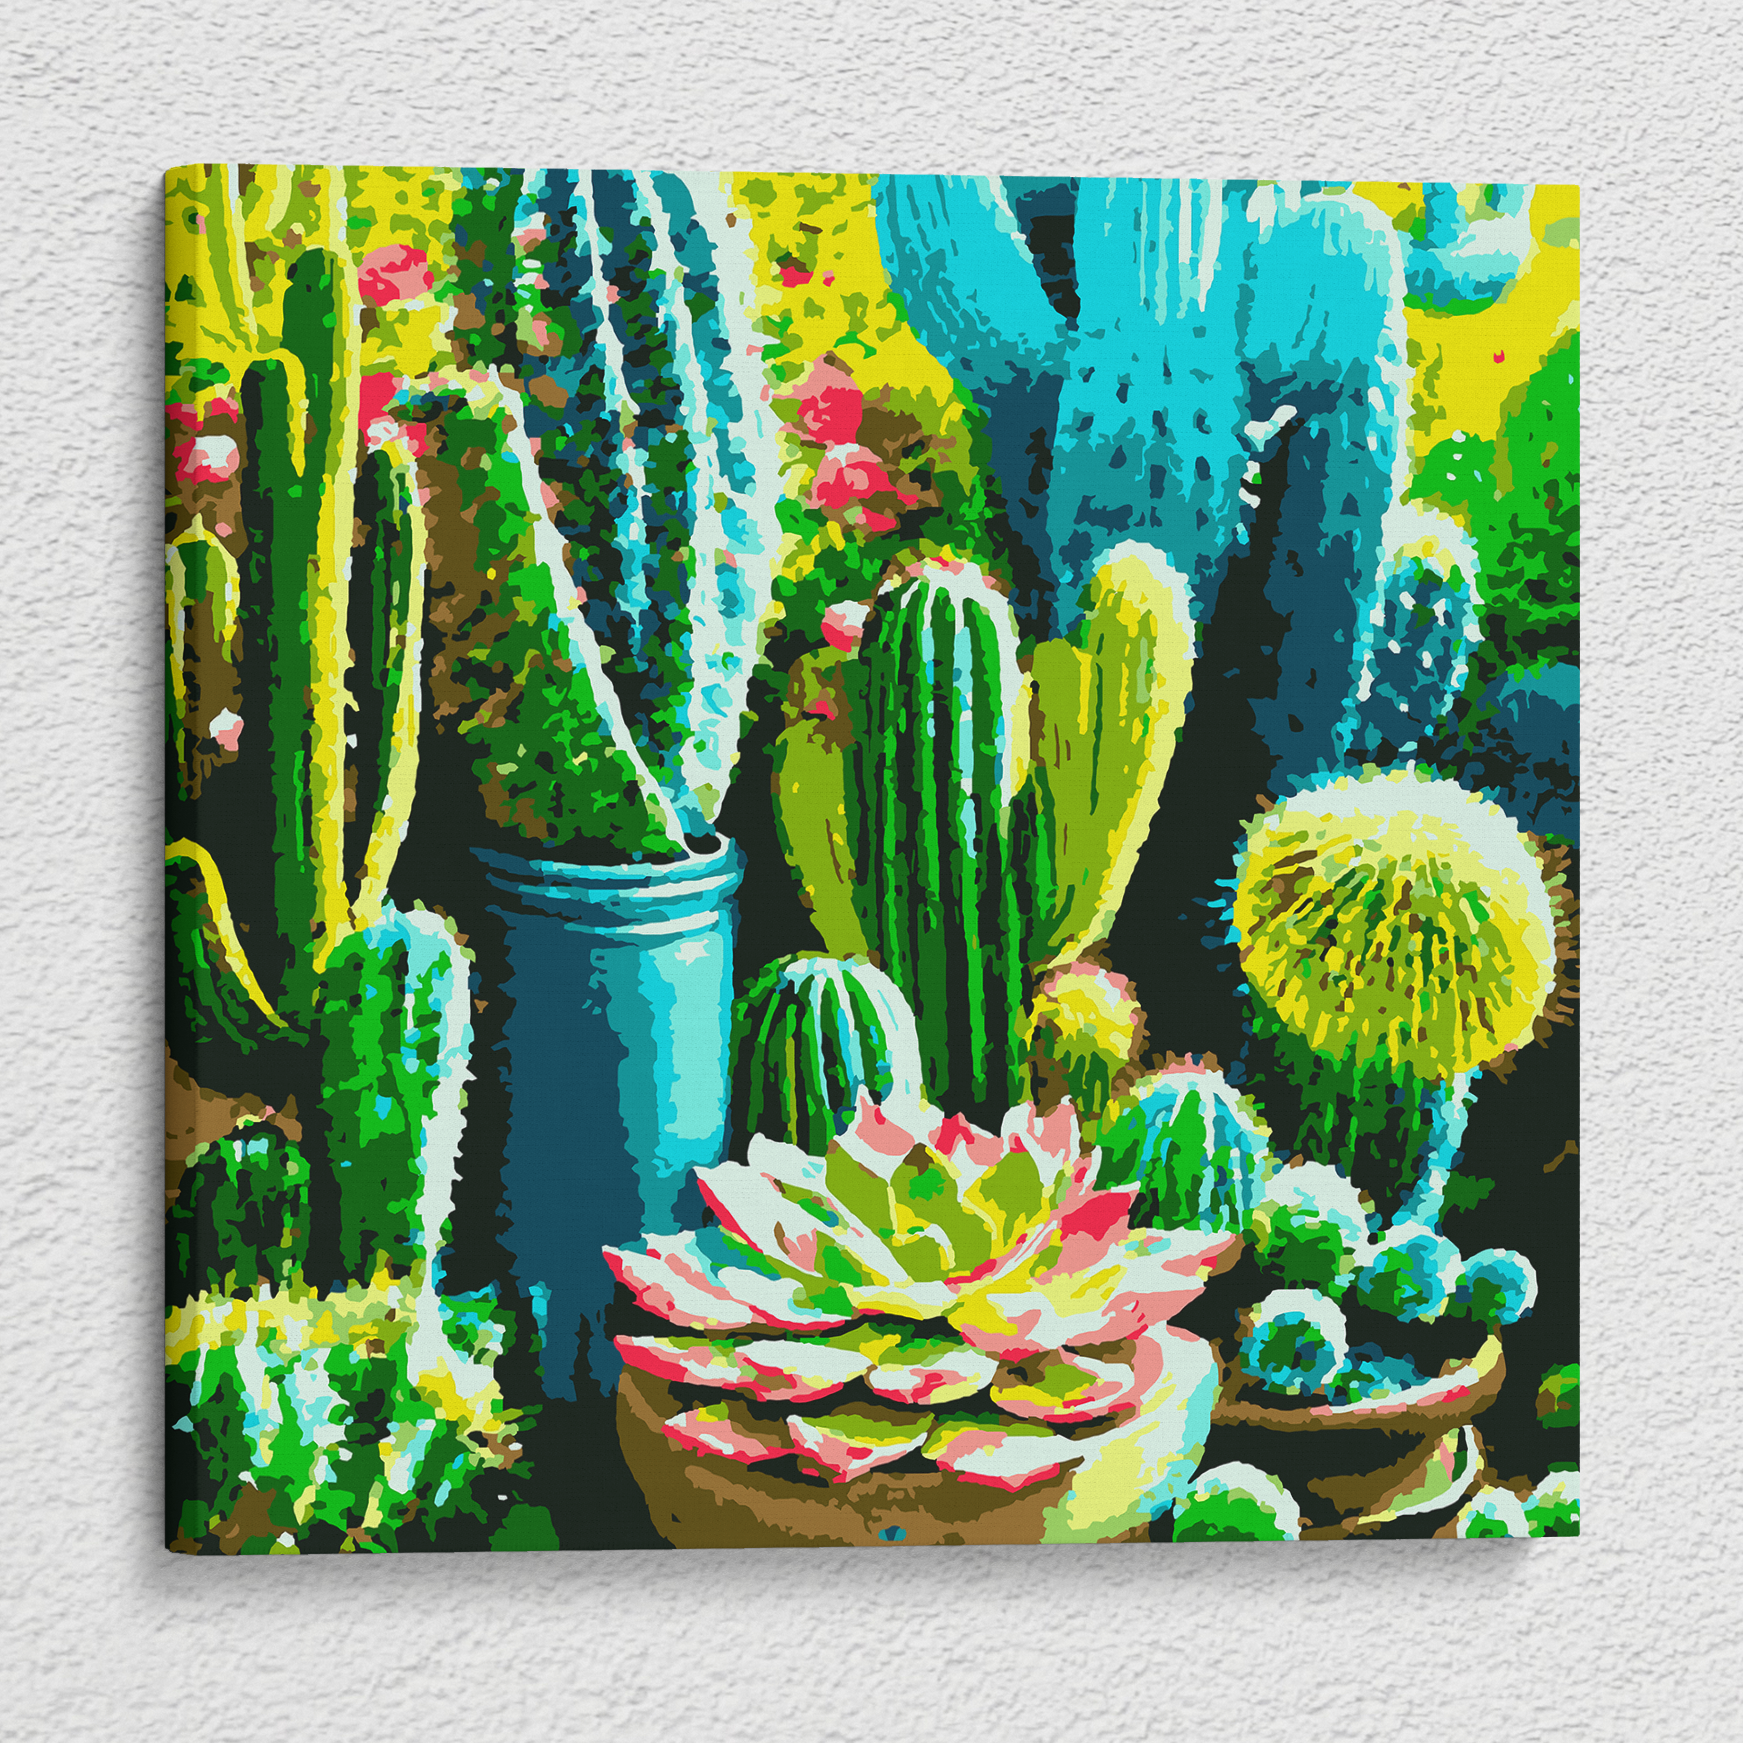 Succulent Garden Paint by Numbers Kit